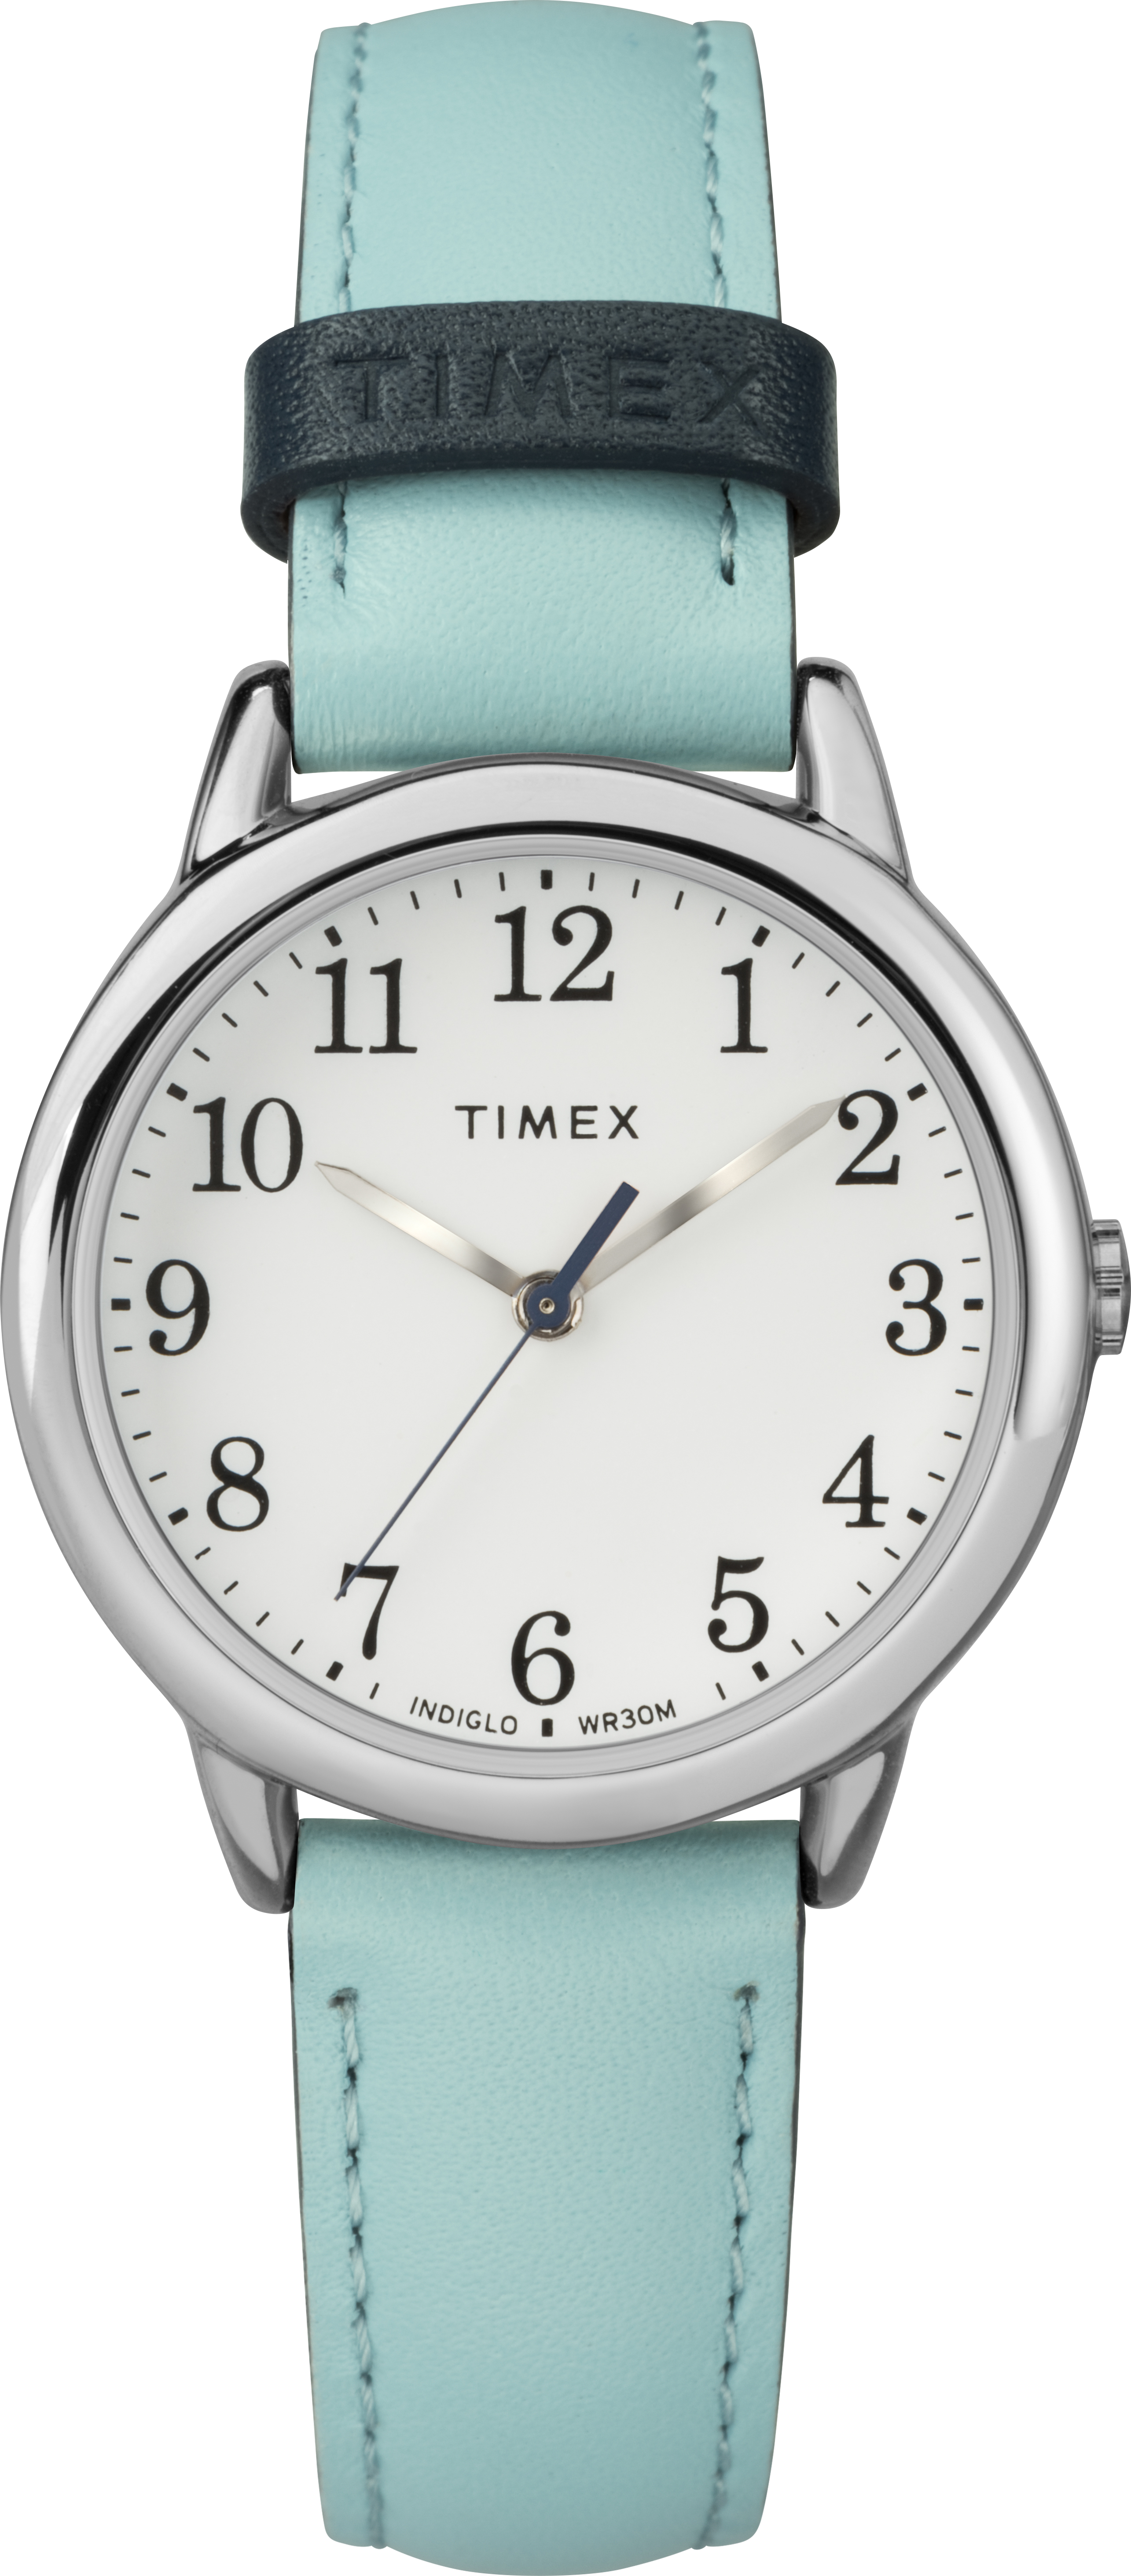 Timex Tw2r62900 Women's 30mm Easy Reader Blue Leather Strap Watch